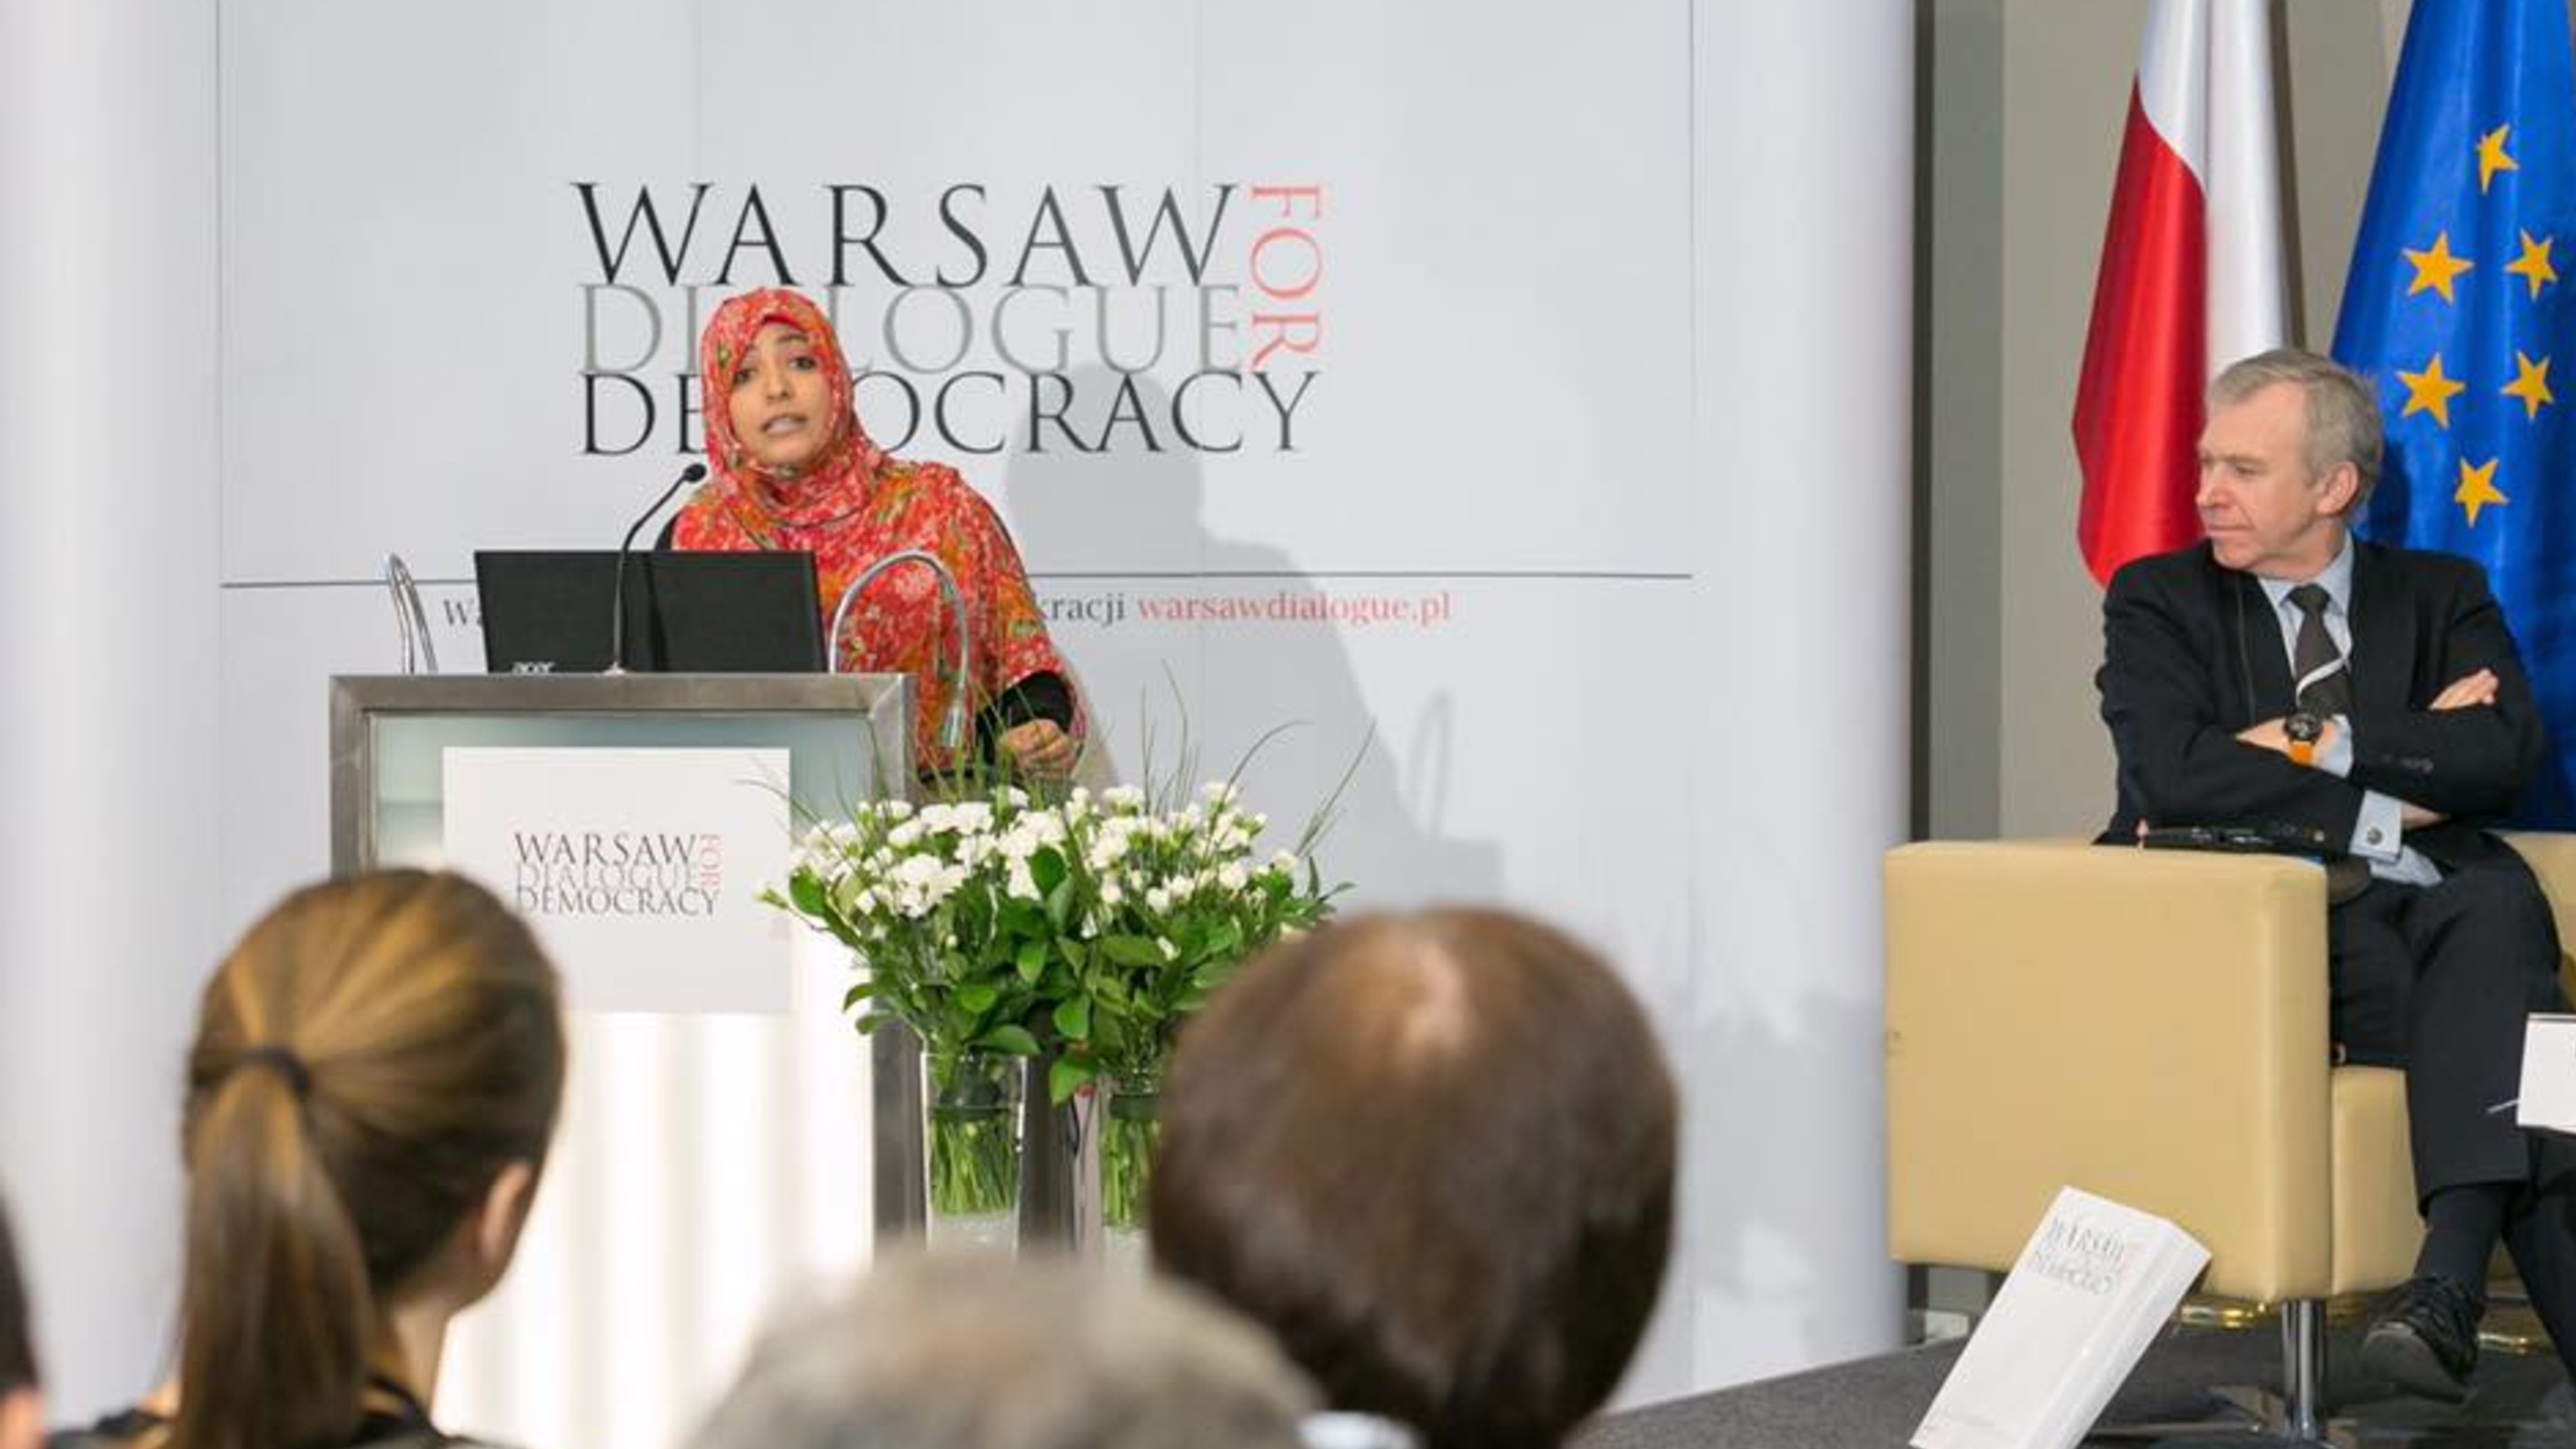 Mrs. Tawakkol Karman’s speech at the opening session of Warsaw Dialogue for Democracy conference held on 15-16 December 2016 in Warsaw